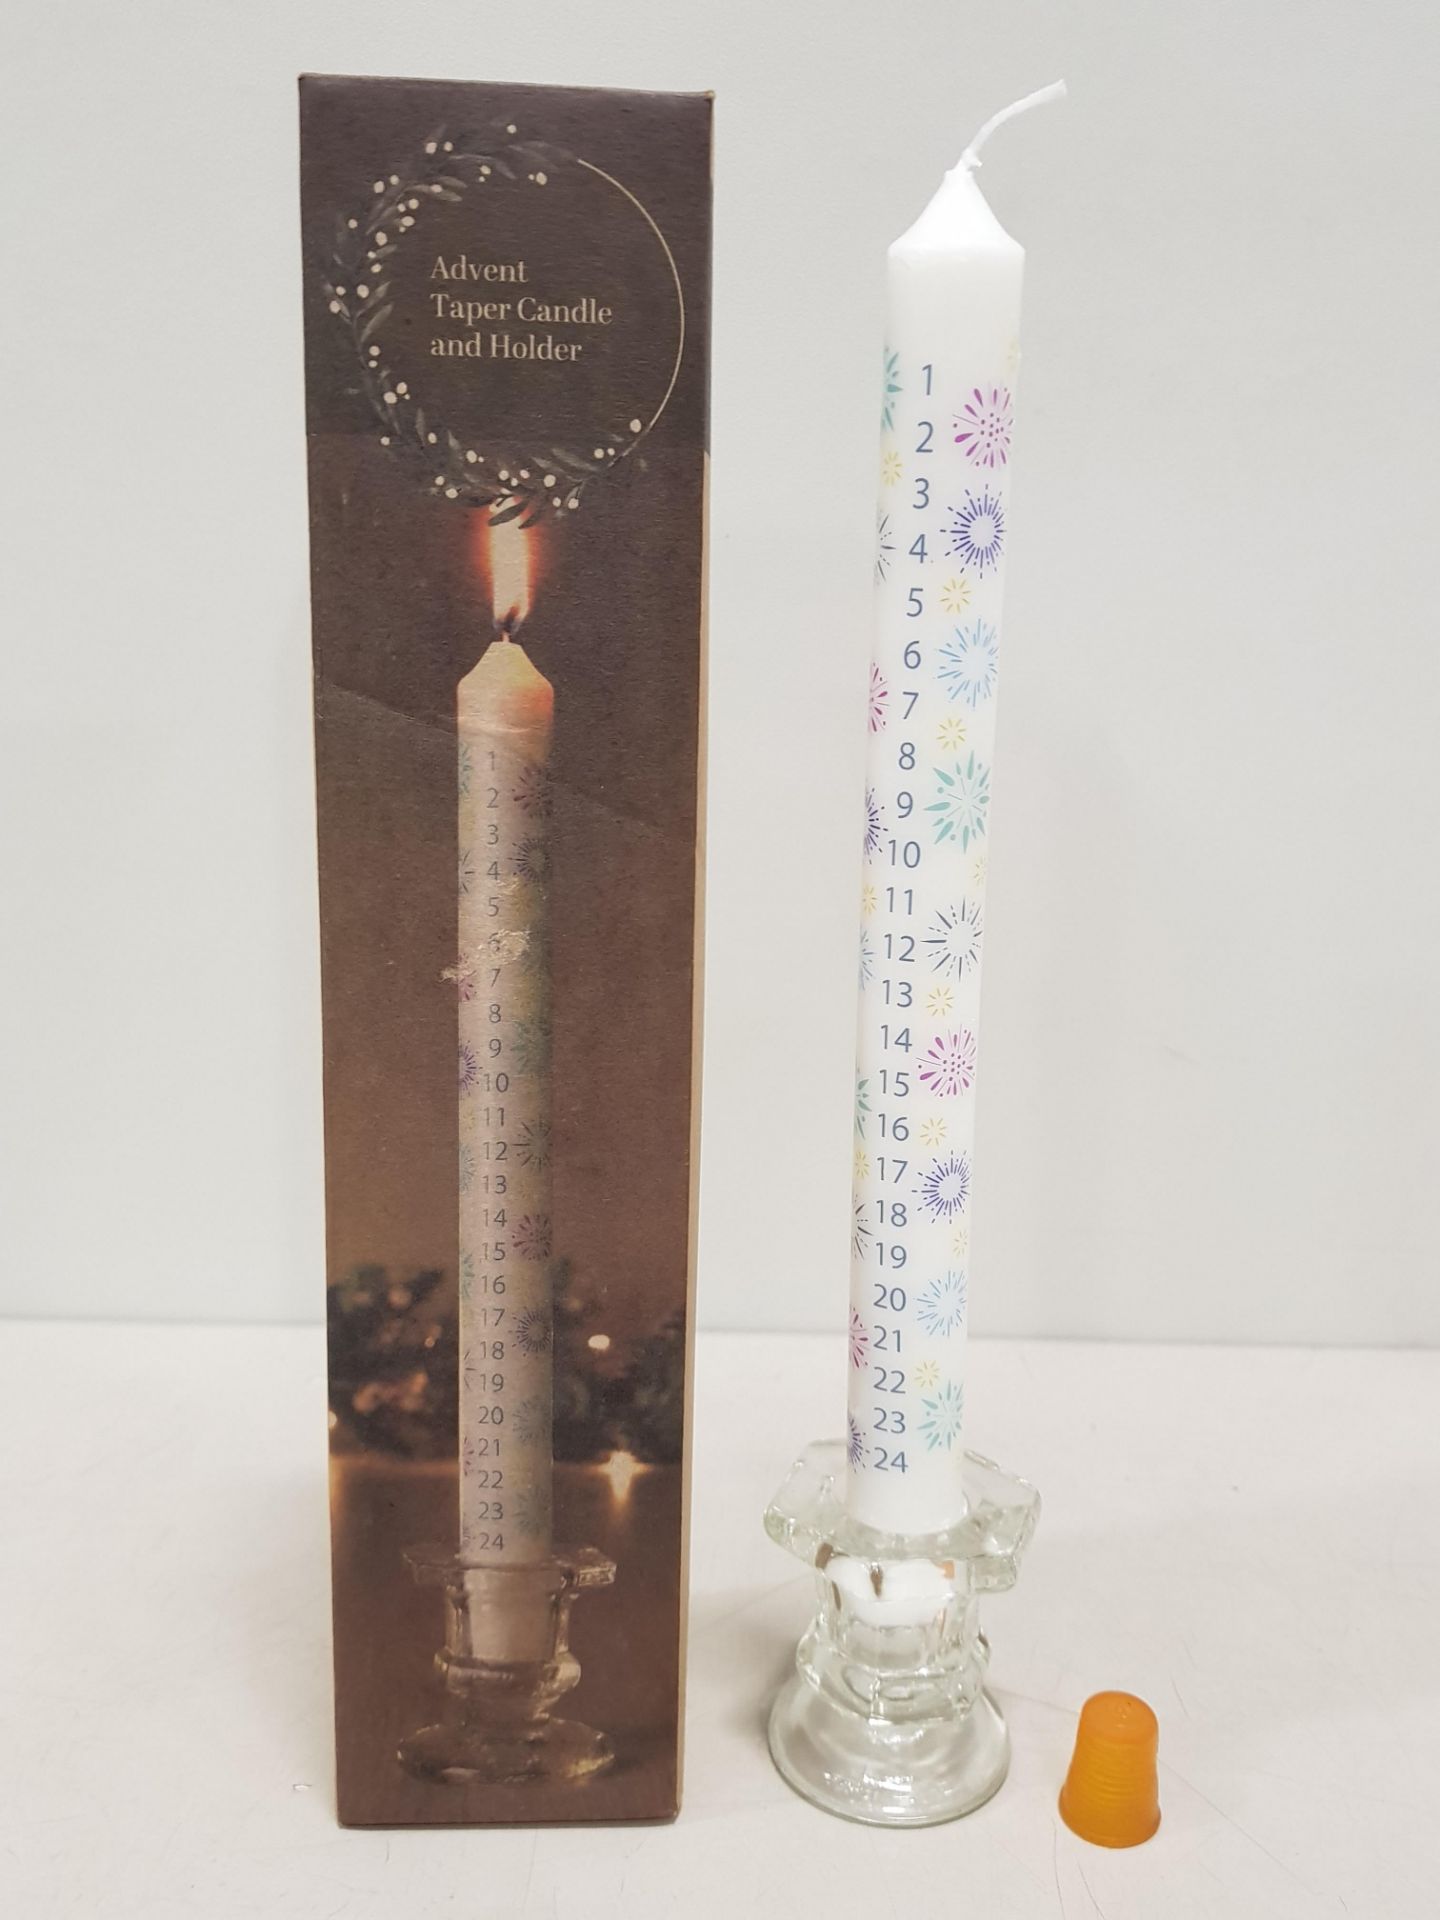 72 X BRAND NEW LAKELAND ADVENT TAPER CANDLE WITH GLASS HOLDER - IN 3 BOXES